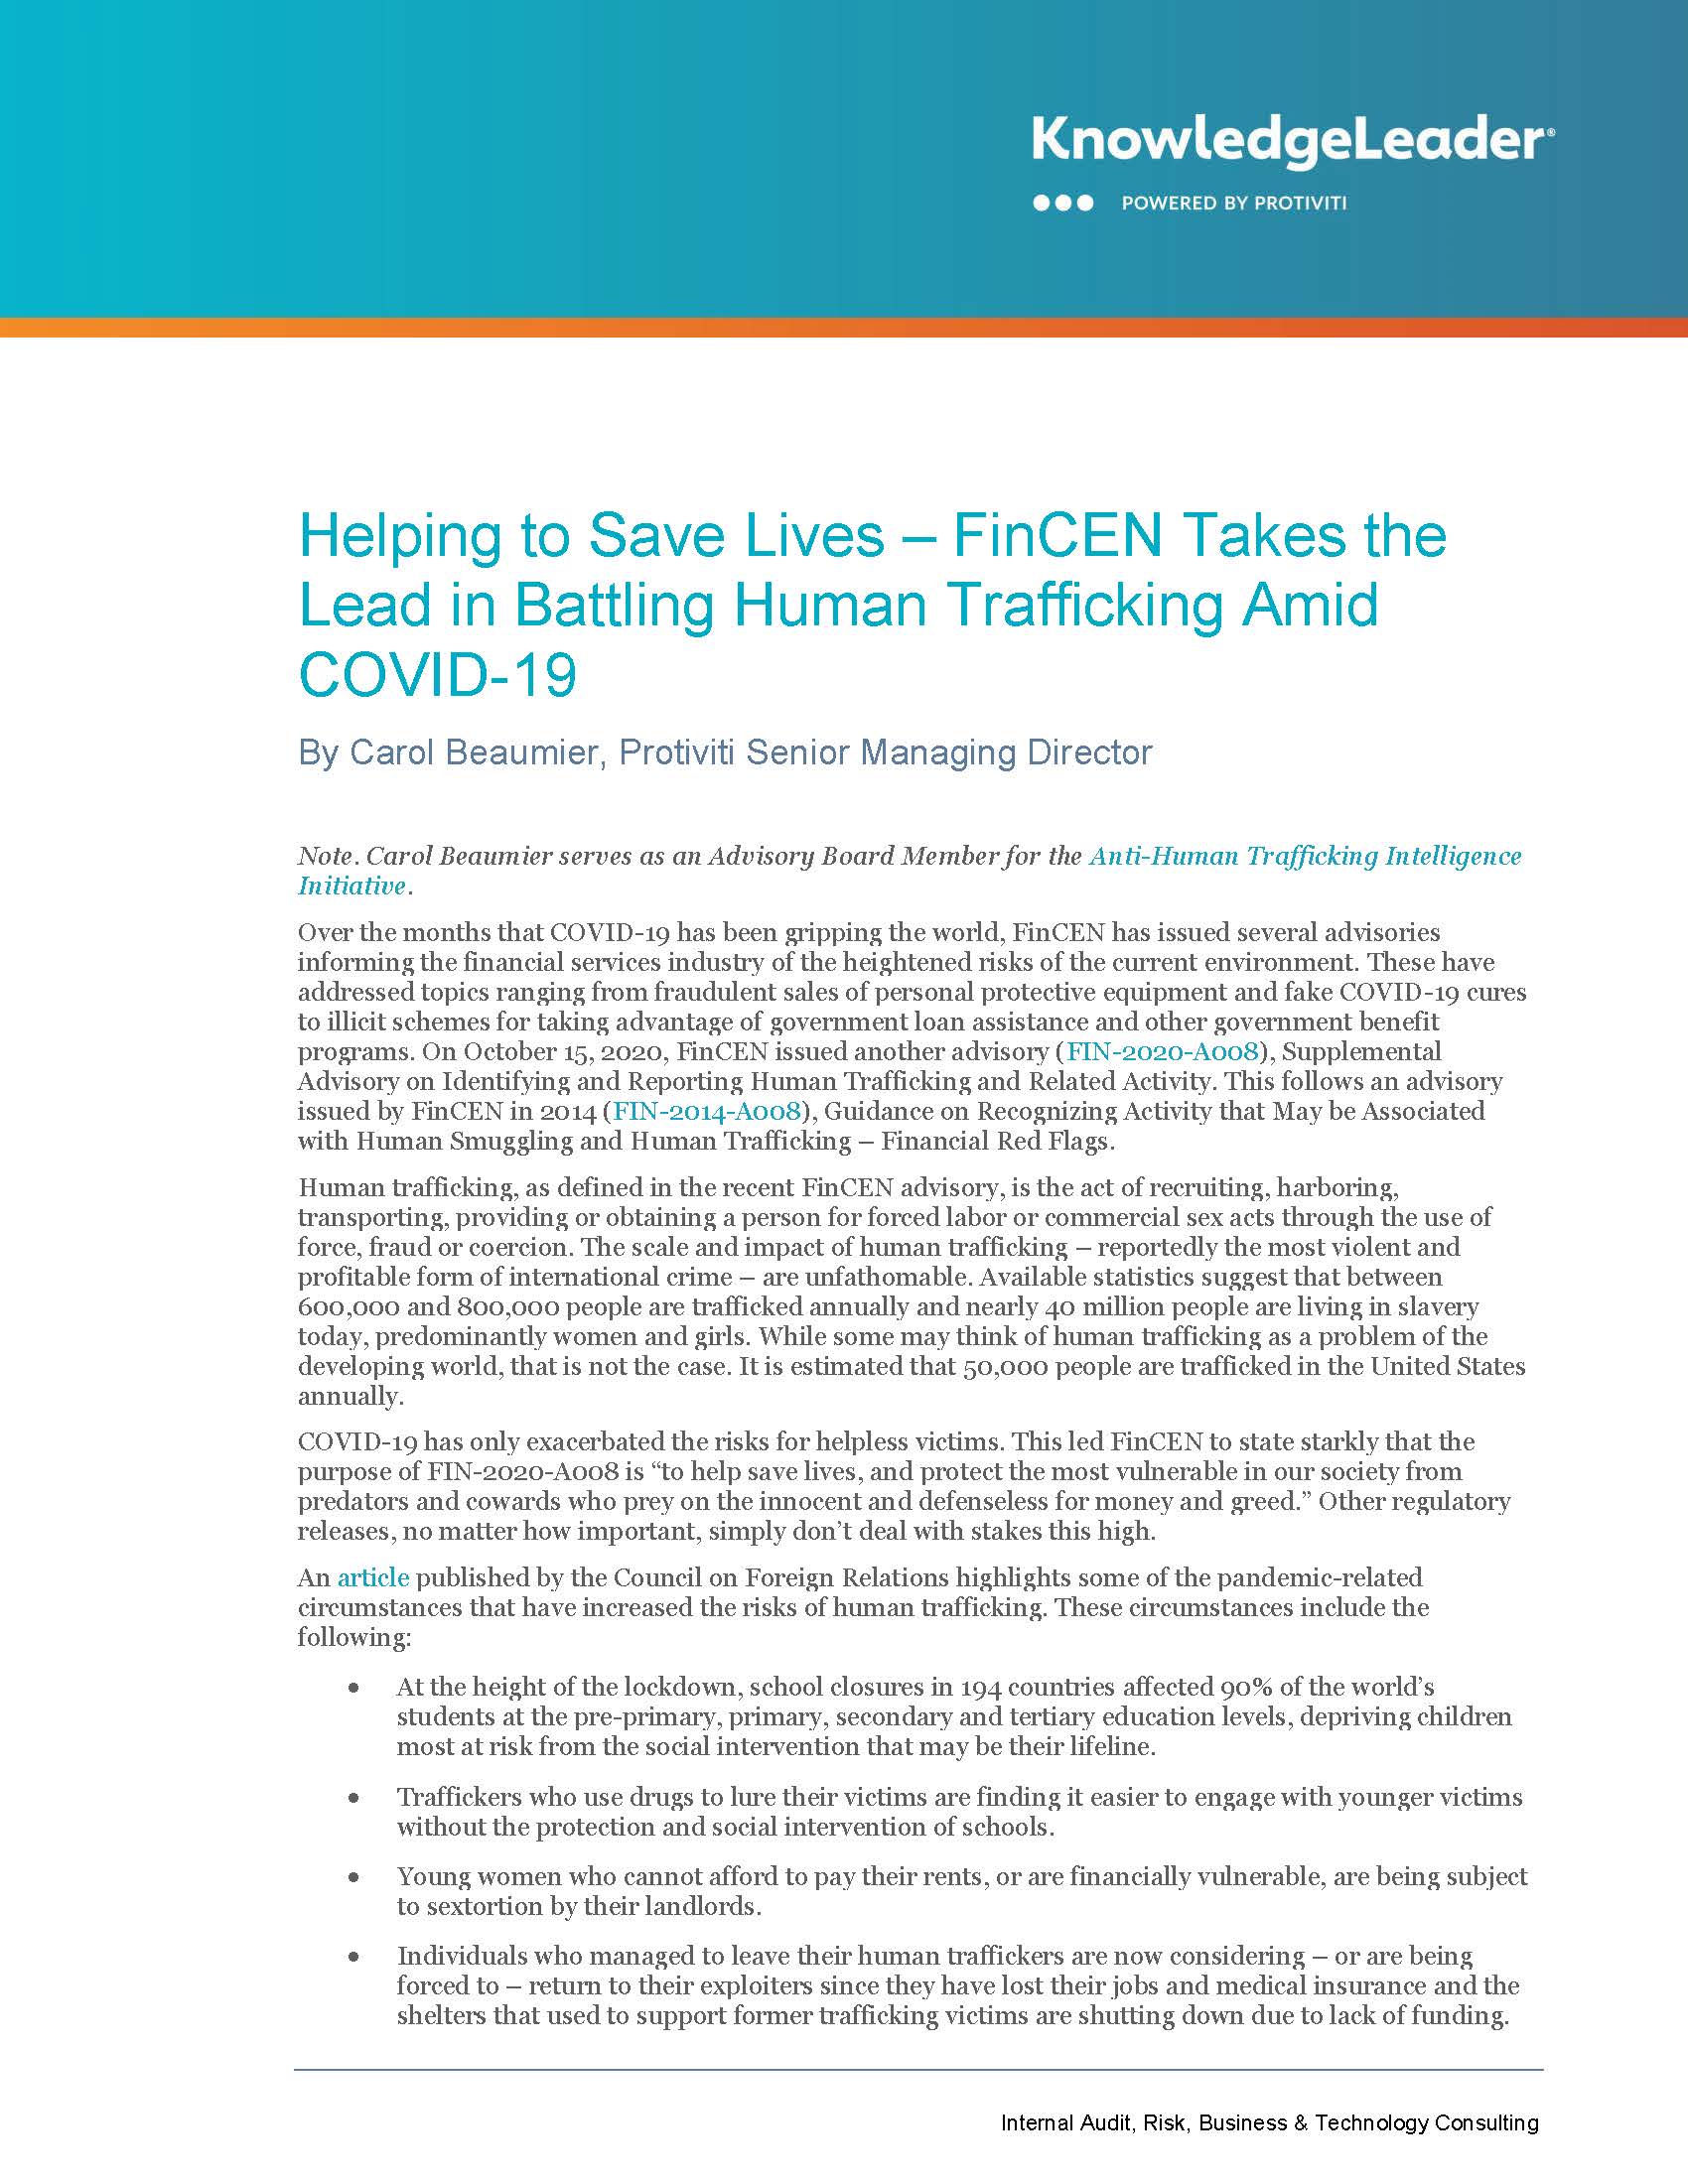 Screenshot of the first page of Helping to Save Lives – FinCEN Takes the Lead in Battling Human Trafficking Amid COVID-19